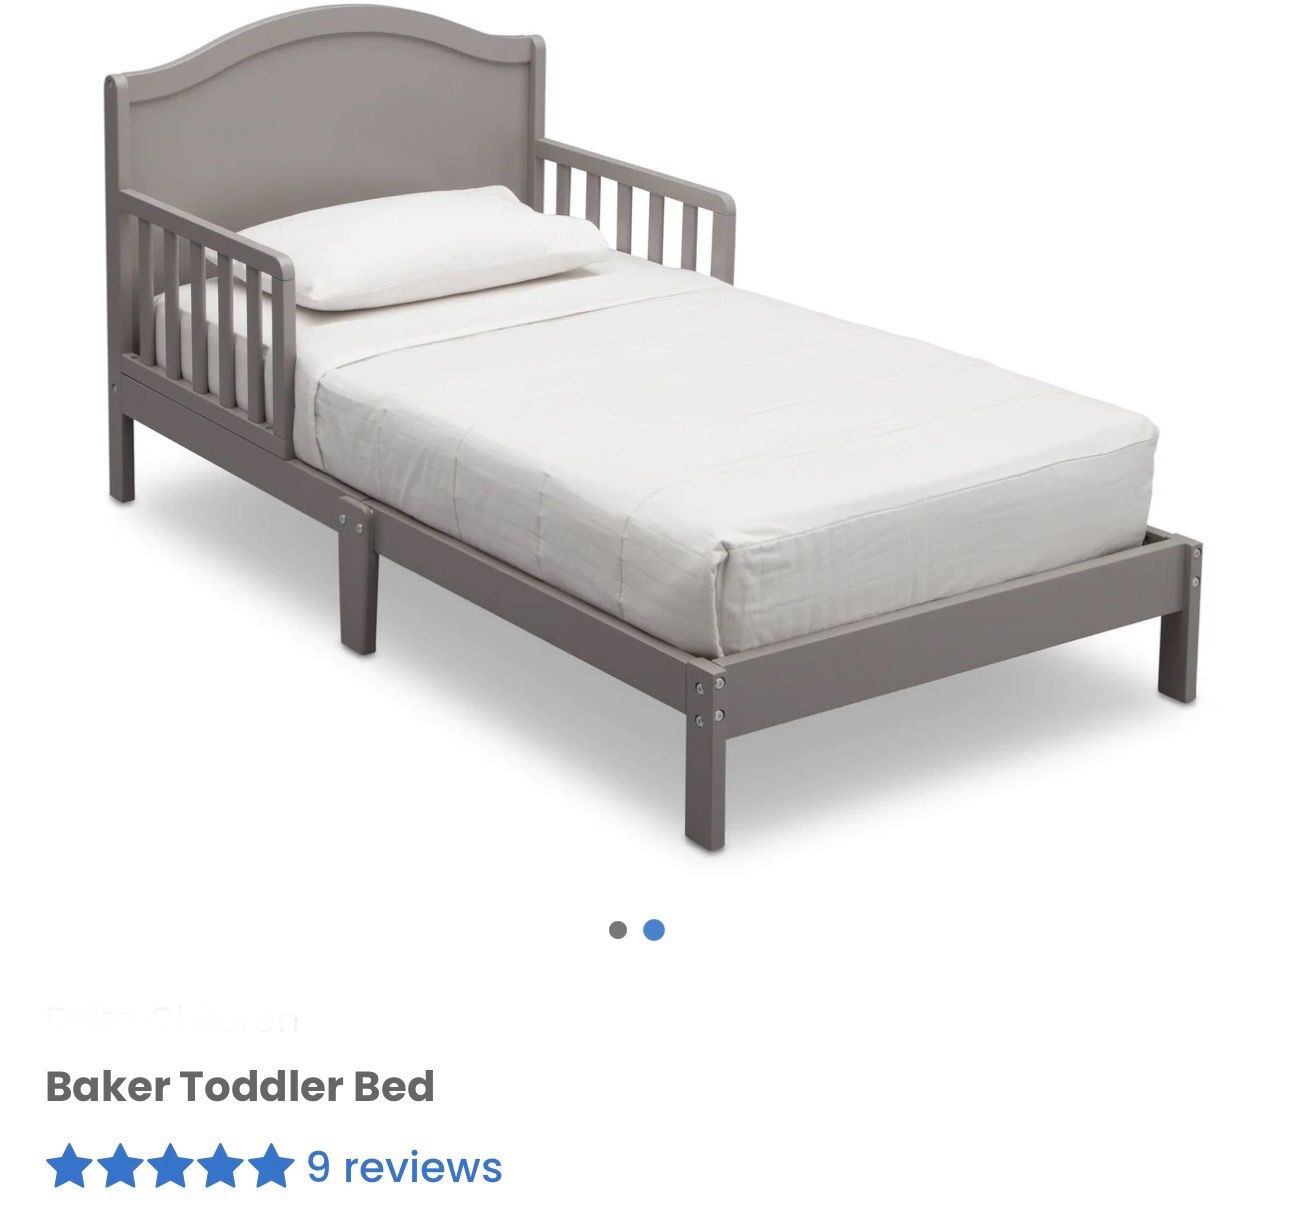 New Baker Toddler Bed / Grey Wood Toddler Bed (Mattress Not Included)